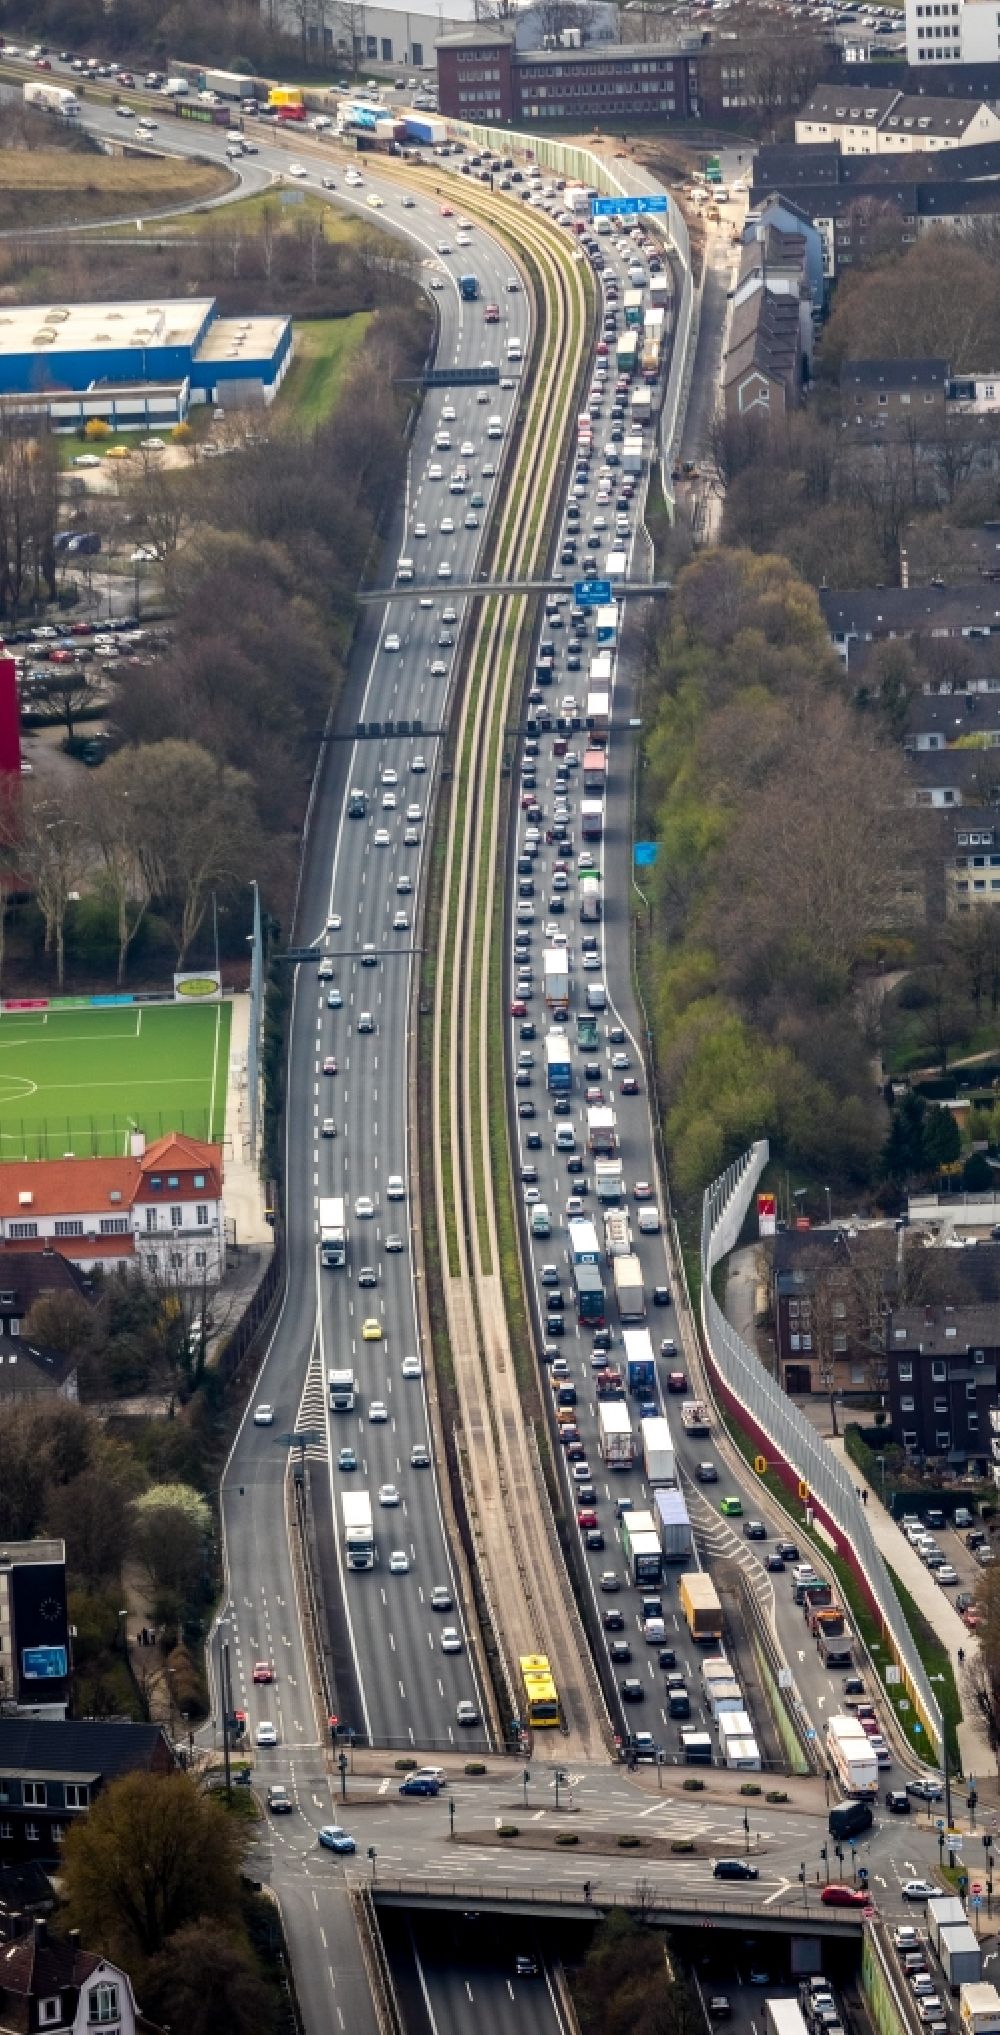 Essen from above - Highway congestion along the route of the lanes BAB A40 - A52 in the district Frillendorf in Essen in the state North Rhine-Westphalia, Germany